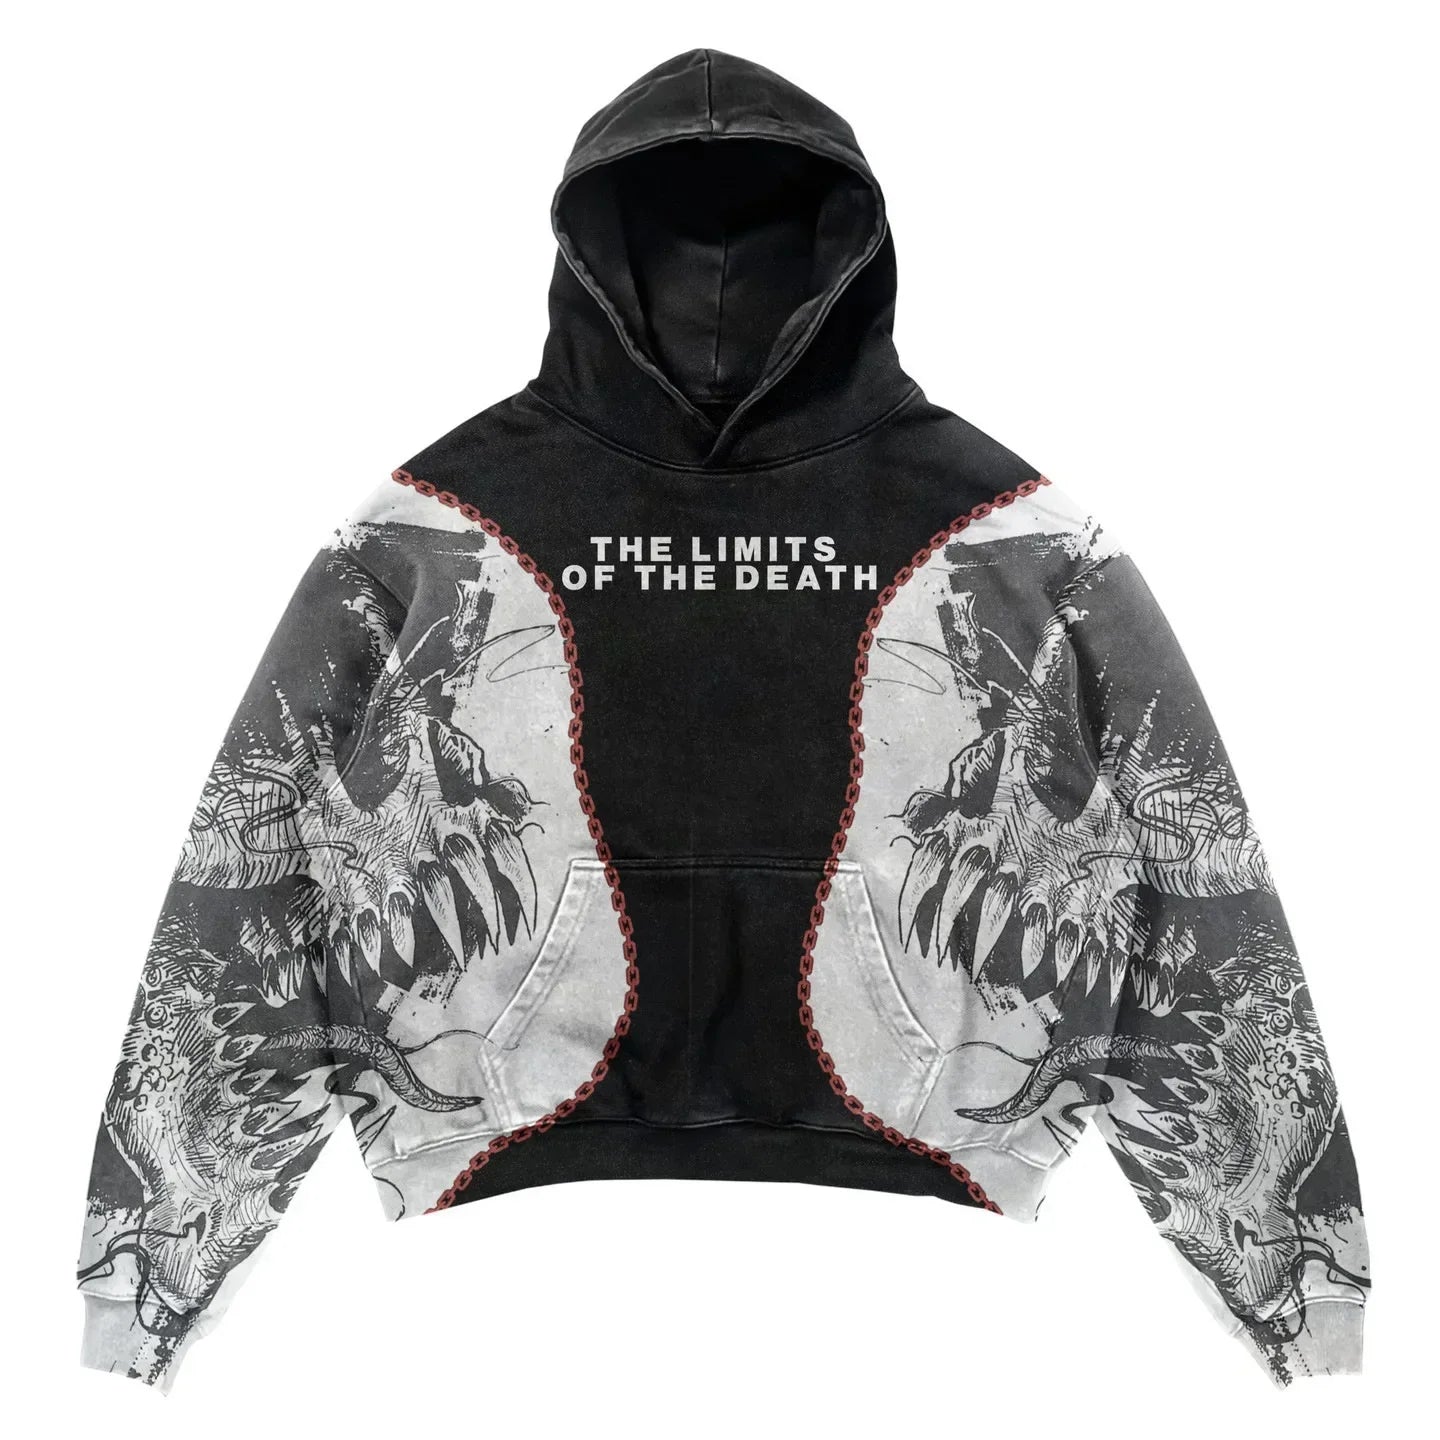 A Maramalive™ Explosions Printed Skull Y2K Retro Hooded Sweater Coat Street Style Gothic Casual Fashion Hooded Sweater Men's Female with white and red graphic prints and the text "THE LIMITS OF THE DEATH" across the chest, embodying a punk style that's perfect for men's clothing collections.